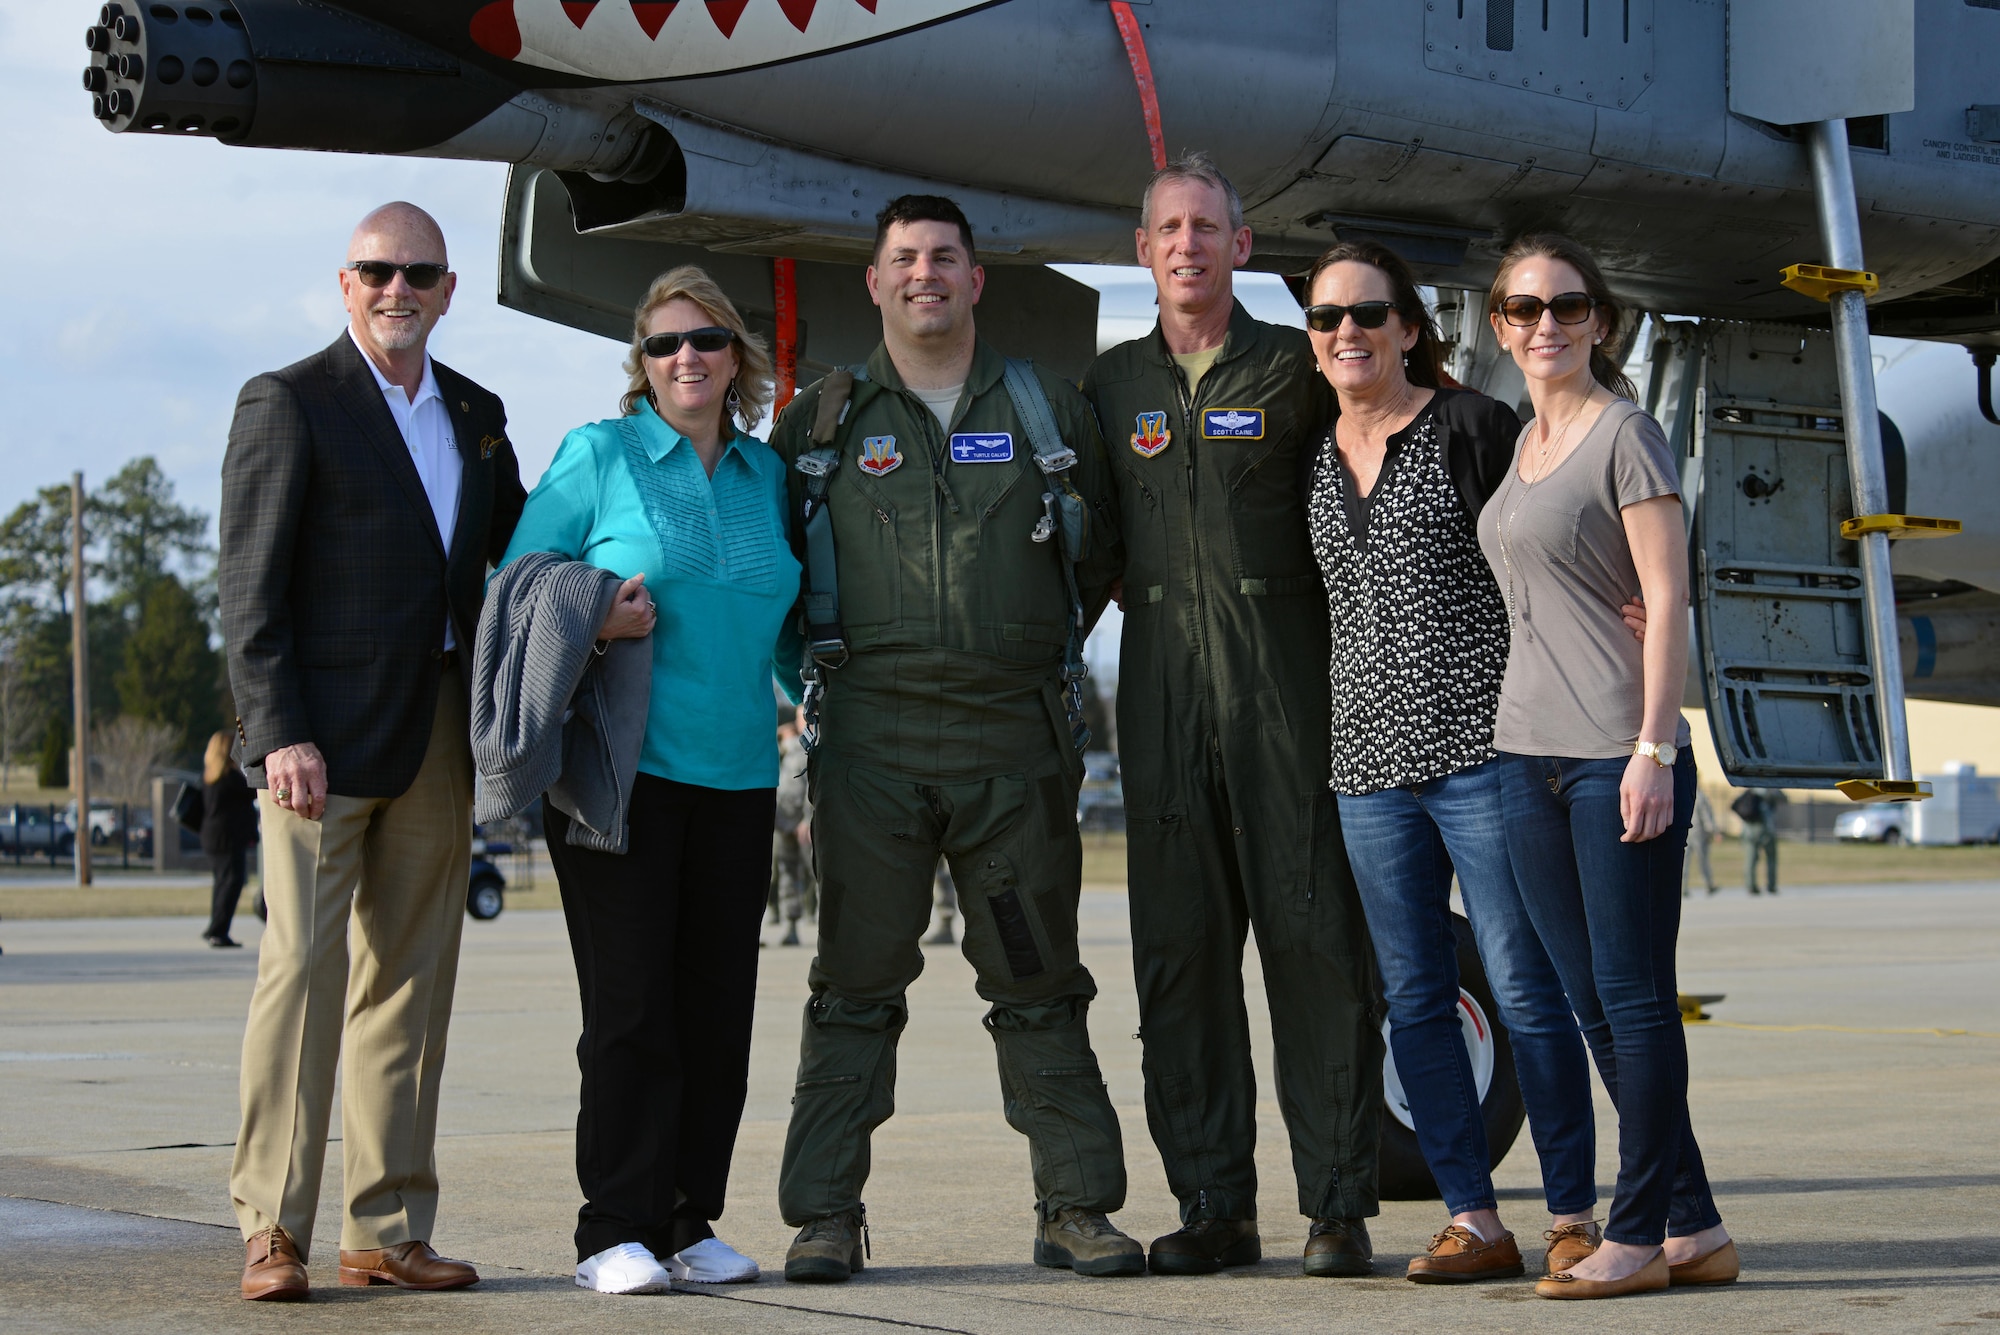 U.S. Air Force Col. Scott Caine, 9th Air Force vice commander, stands with family and friends following the final flight of his Air Force career, Shaw Air Force Base, S.C., Feb. 8, 2017. Family, friends and coworkers greeted Caine after he landed and participated in final flight traditions, such as hosing Caine with water. (U.S. Air Force photo by Airman 1st Class Kathryn R.C. Reaves)